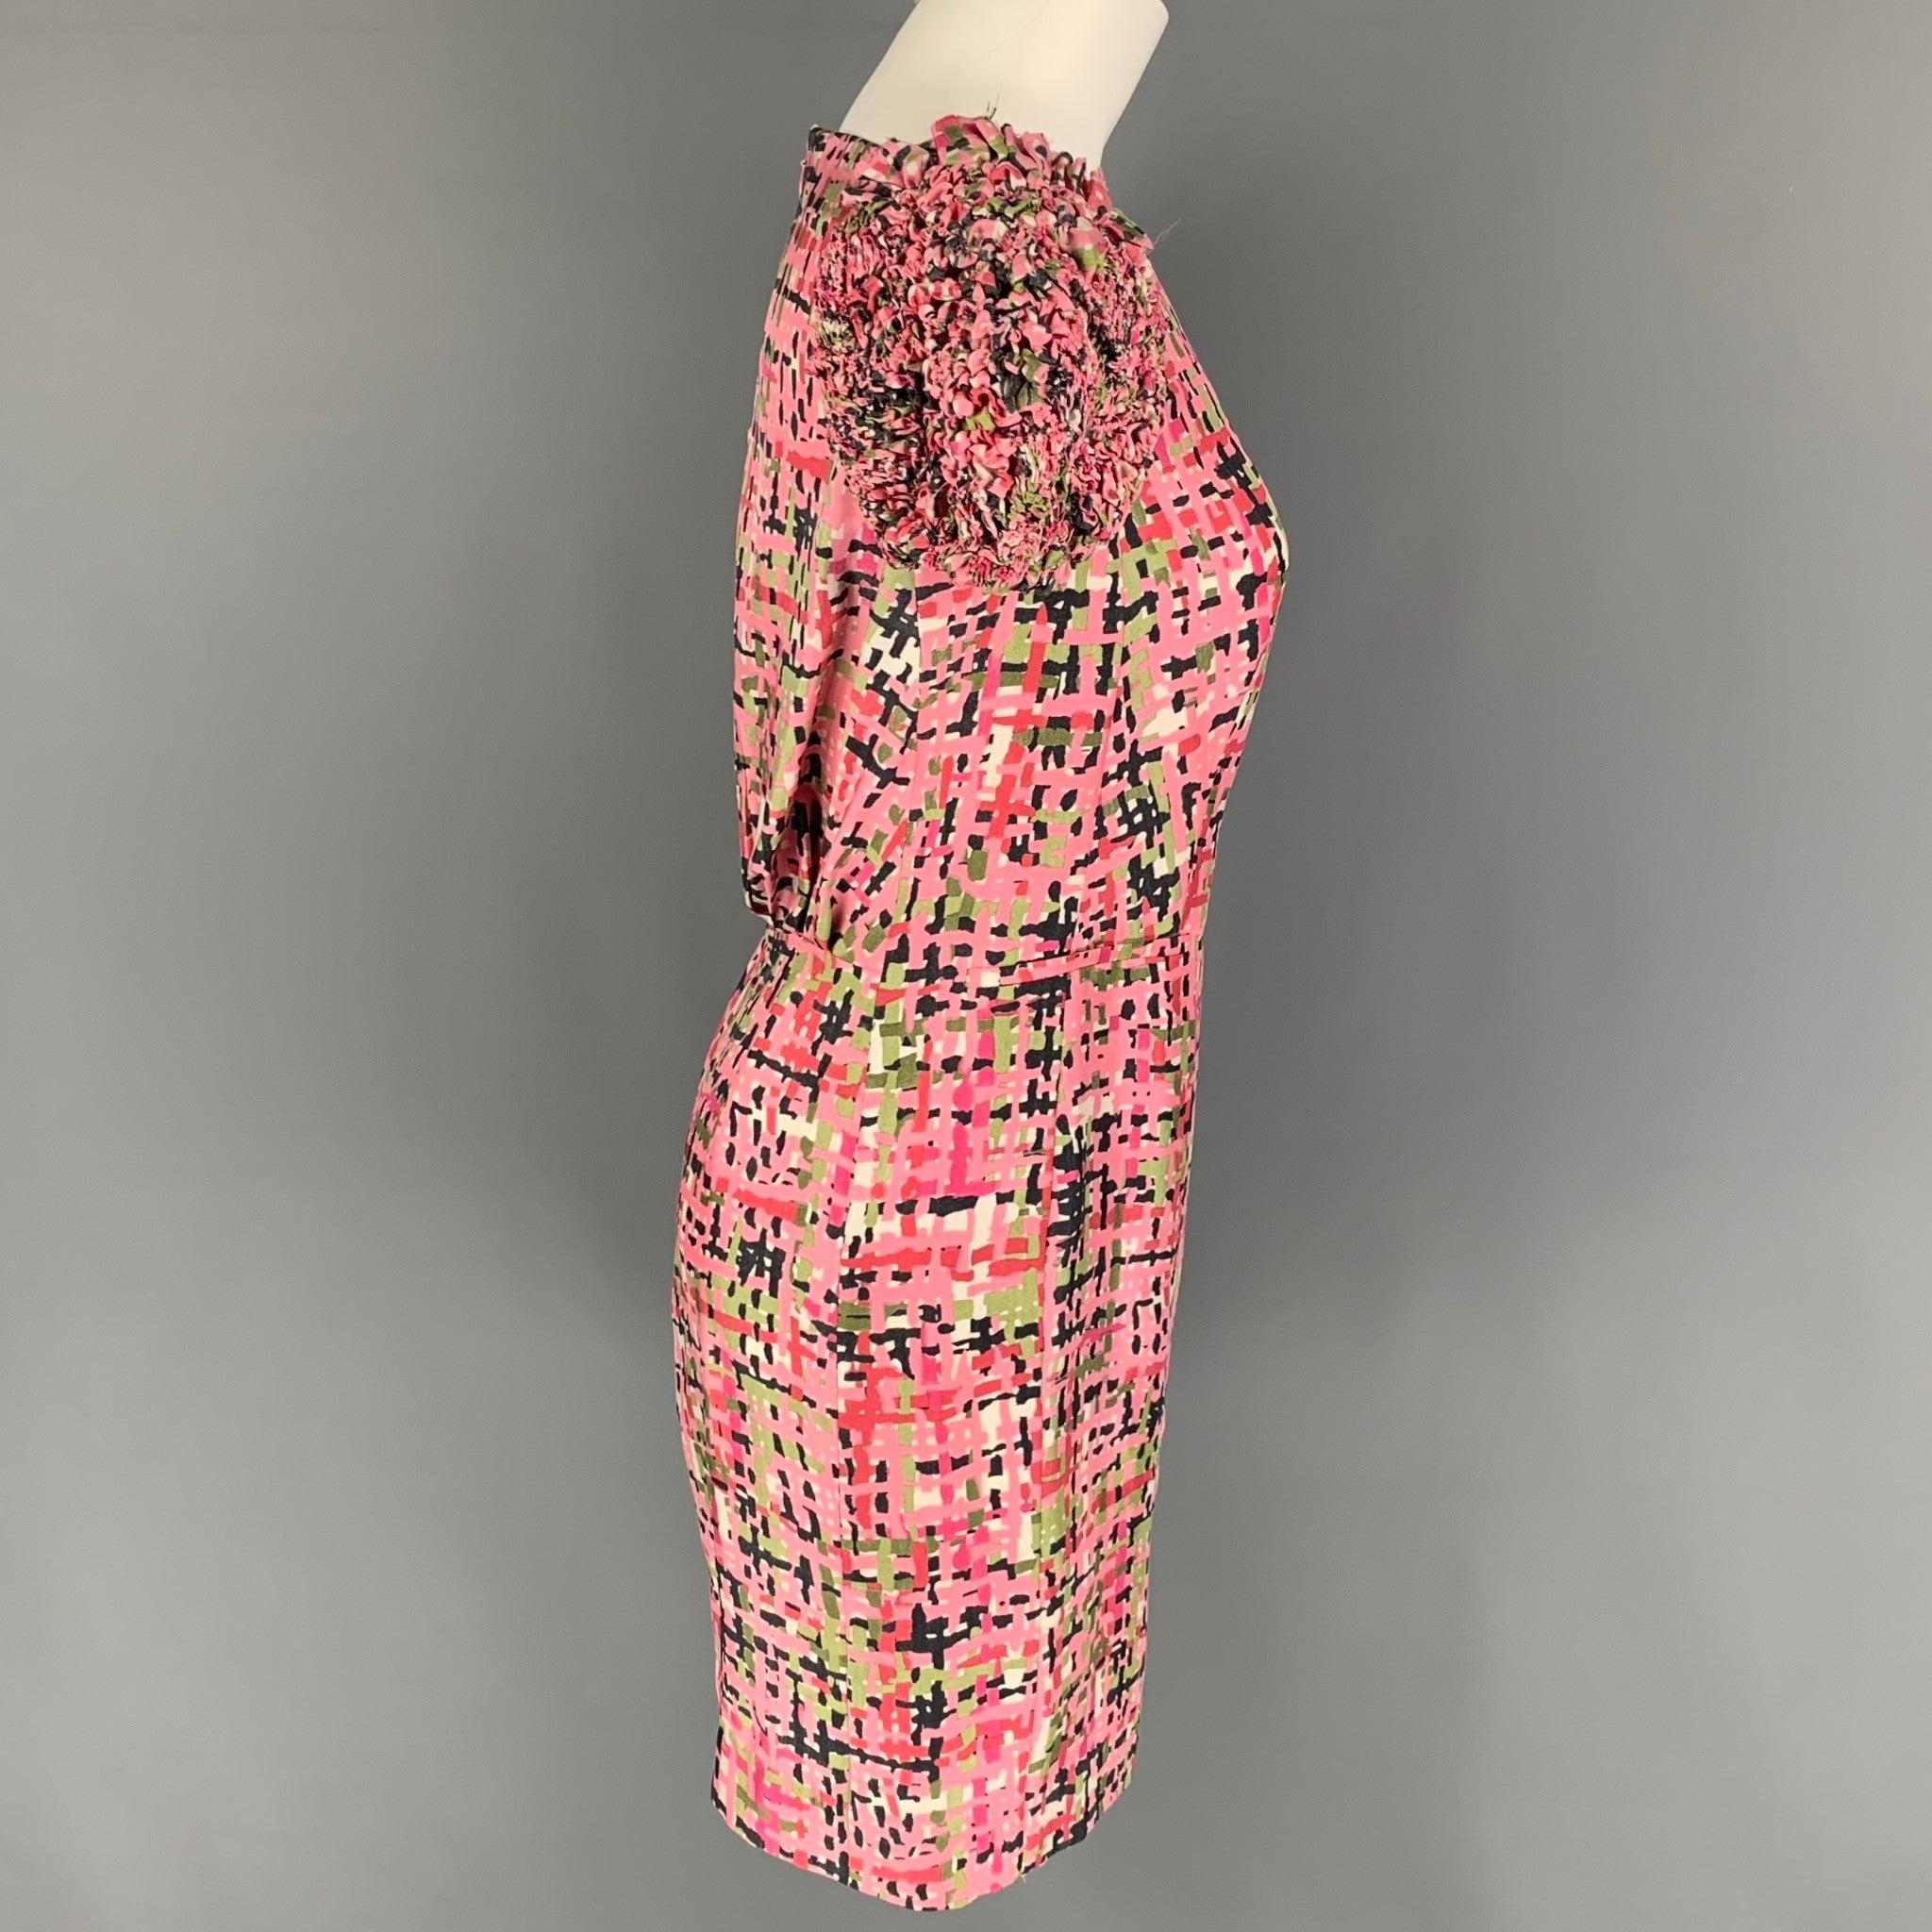 YVES SAINT LAURENT dress comes in a pink & green abstract print silk featuring a shift style, ruffled sleeves, and a back zip up closure. Made in France.
Very Good
Pre-Owned Condition. 

Marked:   F34 

Measurements: 
 
Shoulder: 14 inches  Bust: 30